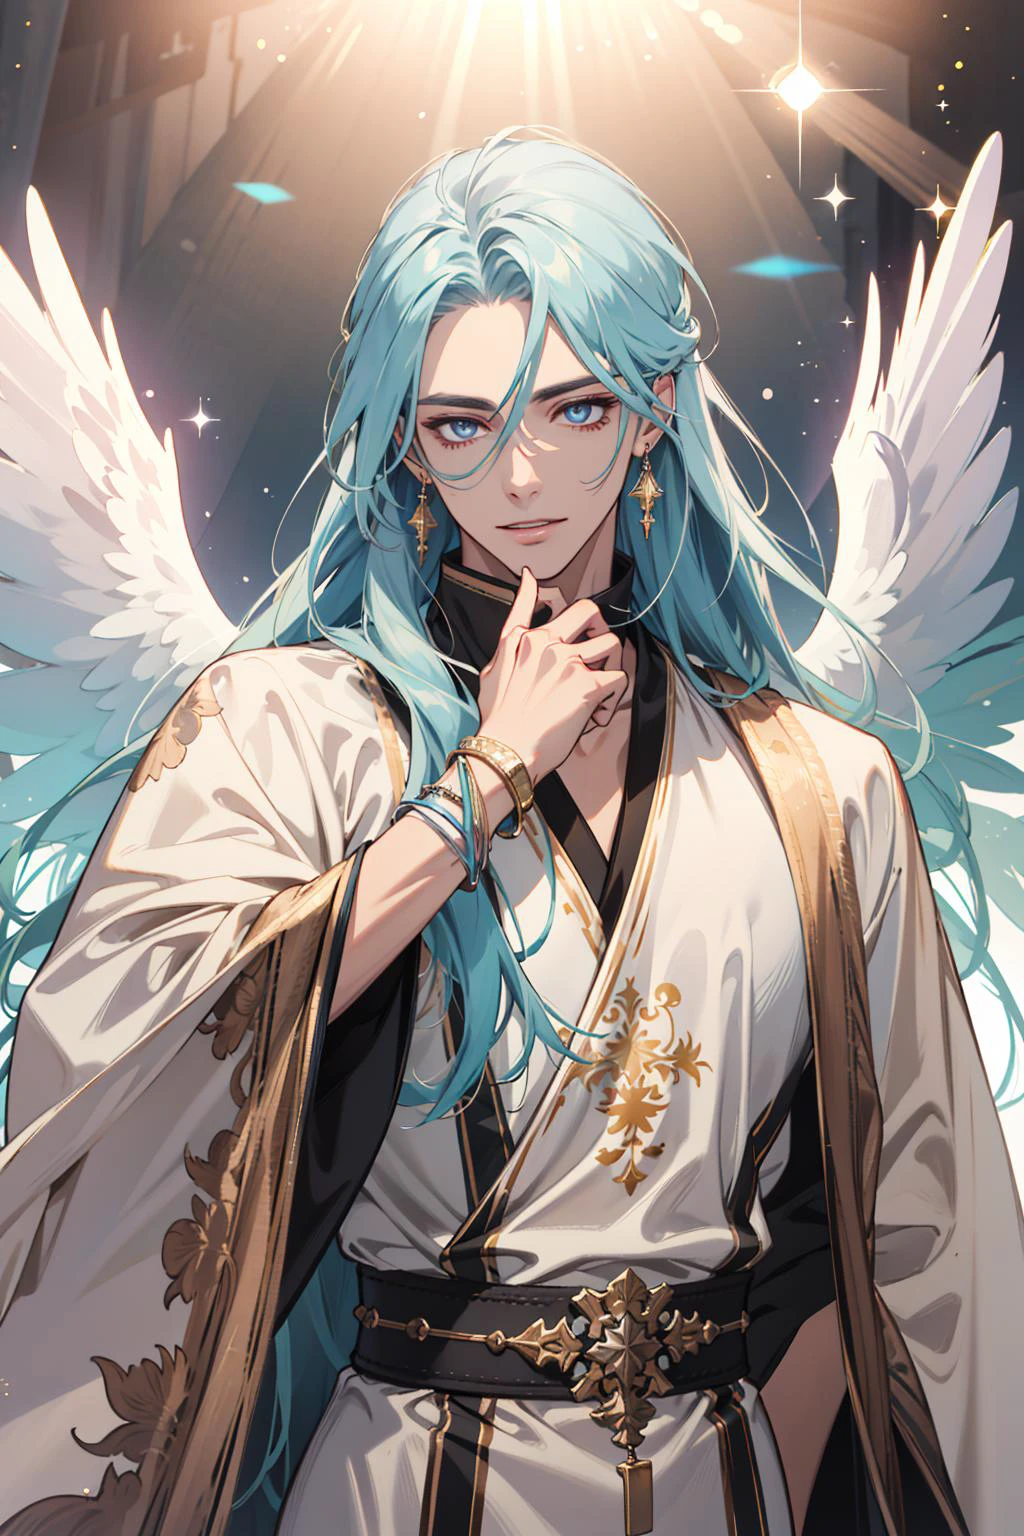 (absurdres, highres, ultra detailed), 1 male, adult, handsome, tall muscular guy, broad shoulders, finely detailed eyes and detailed face, pastel color long hair, fantasy, complex pattern, detailed face, angel wings, lens flare, colorful, glow white particles, white robe, gold bracelets and accessories, prism, glowing, glitter, particles, bloom, likes to celebrate and have fun, enjoys nature, bright and optimistic outlook, creative and adventurous spirit, represents happiness and harmony